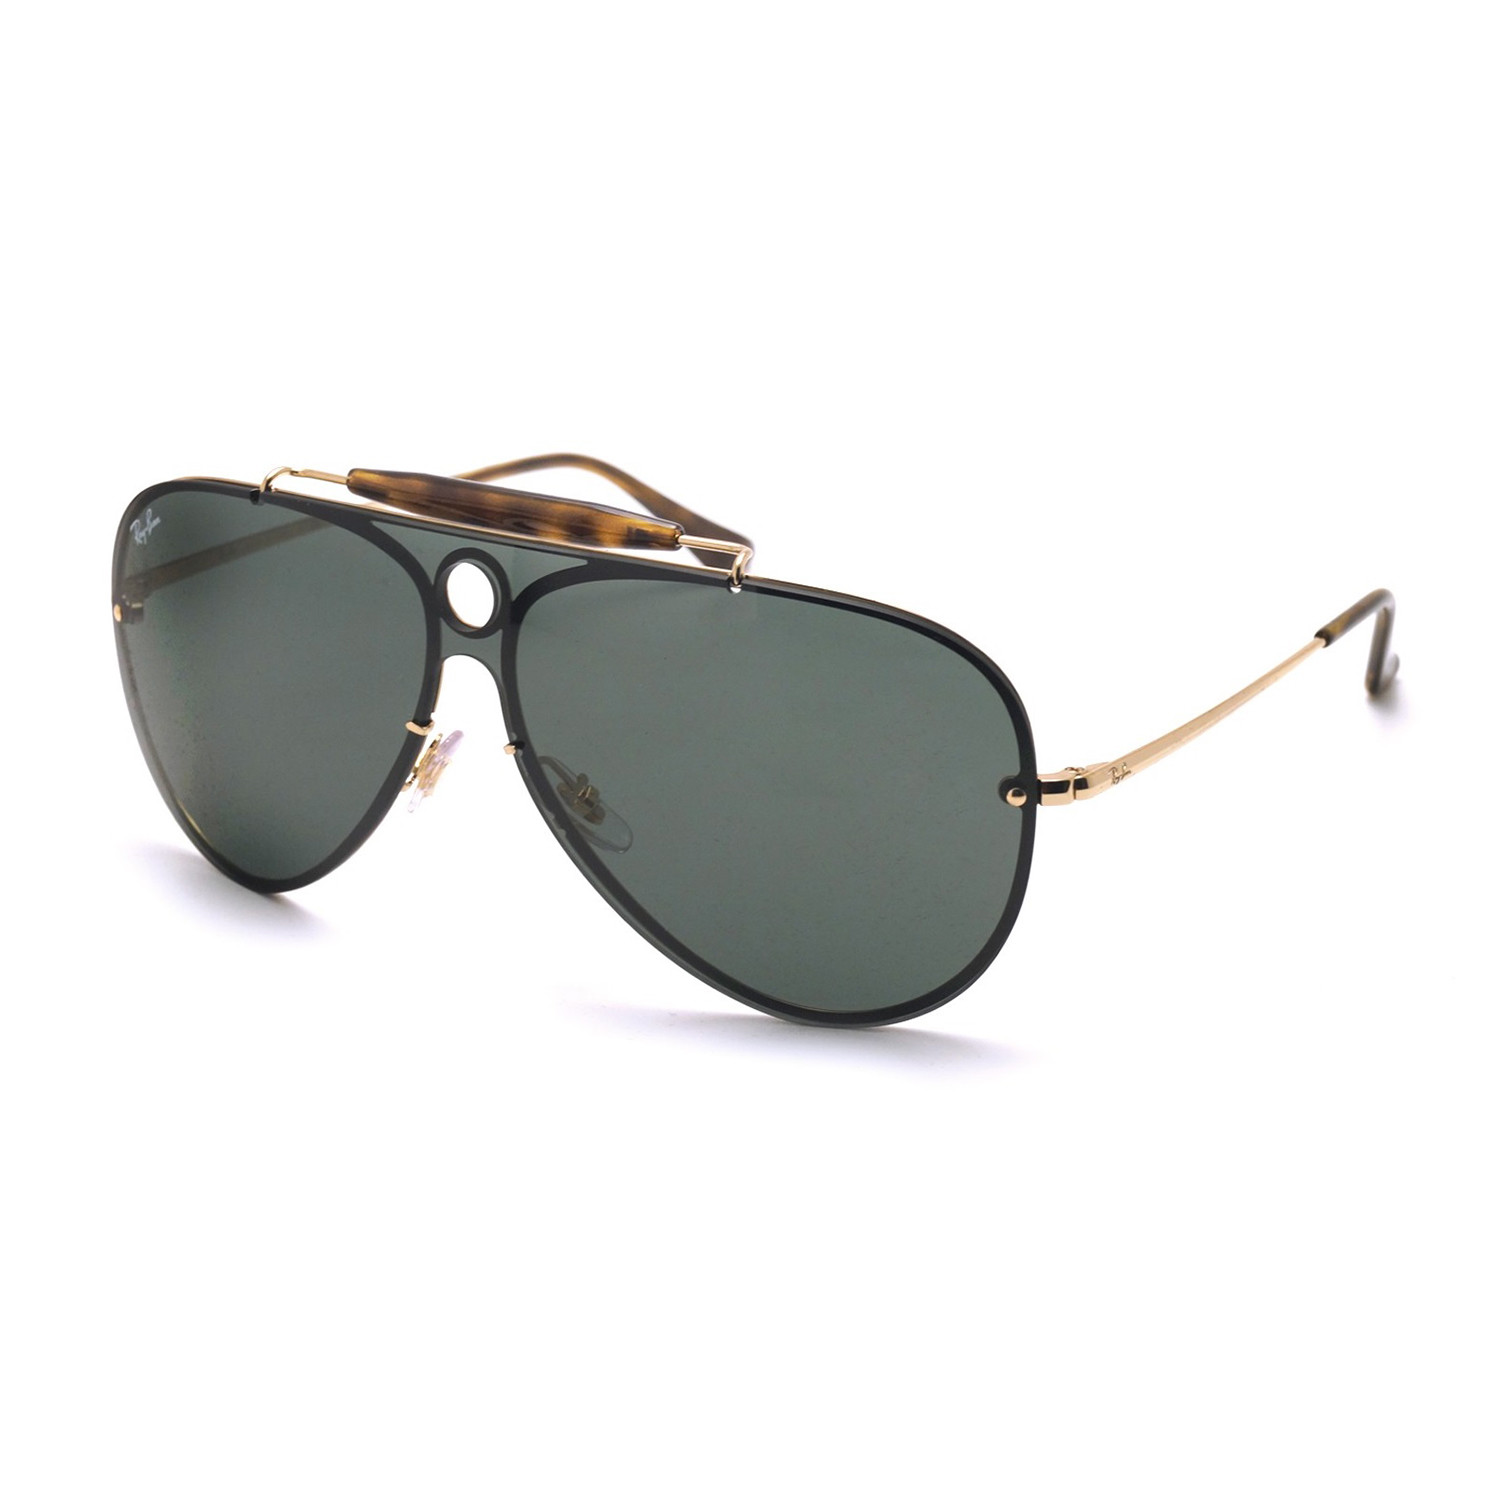 Men's Shield Frame Sunglasses // Black + Gold - Ray-Ban - Touch of Modern